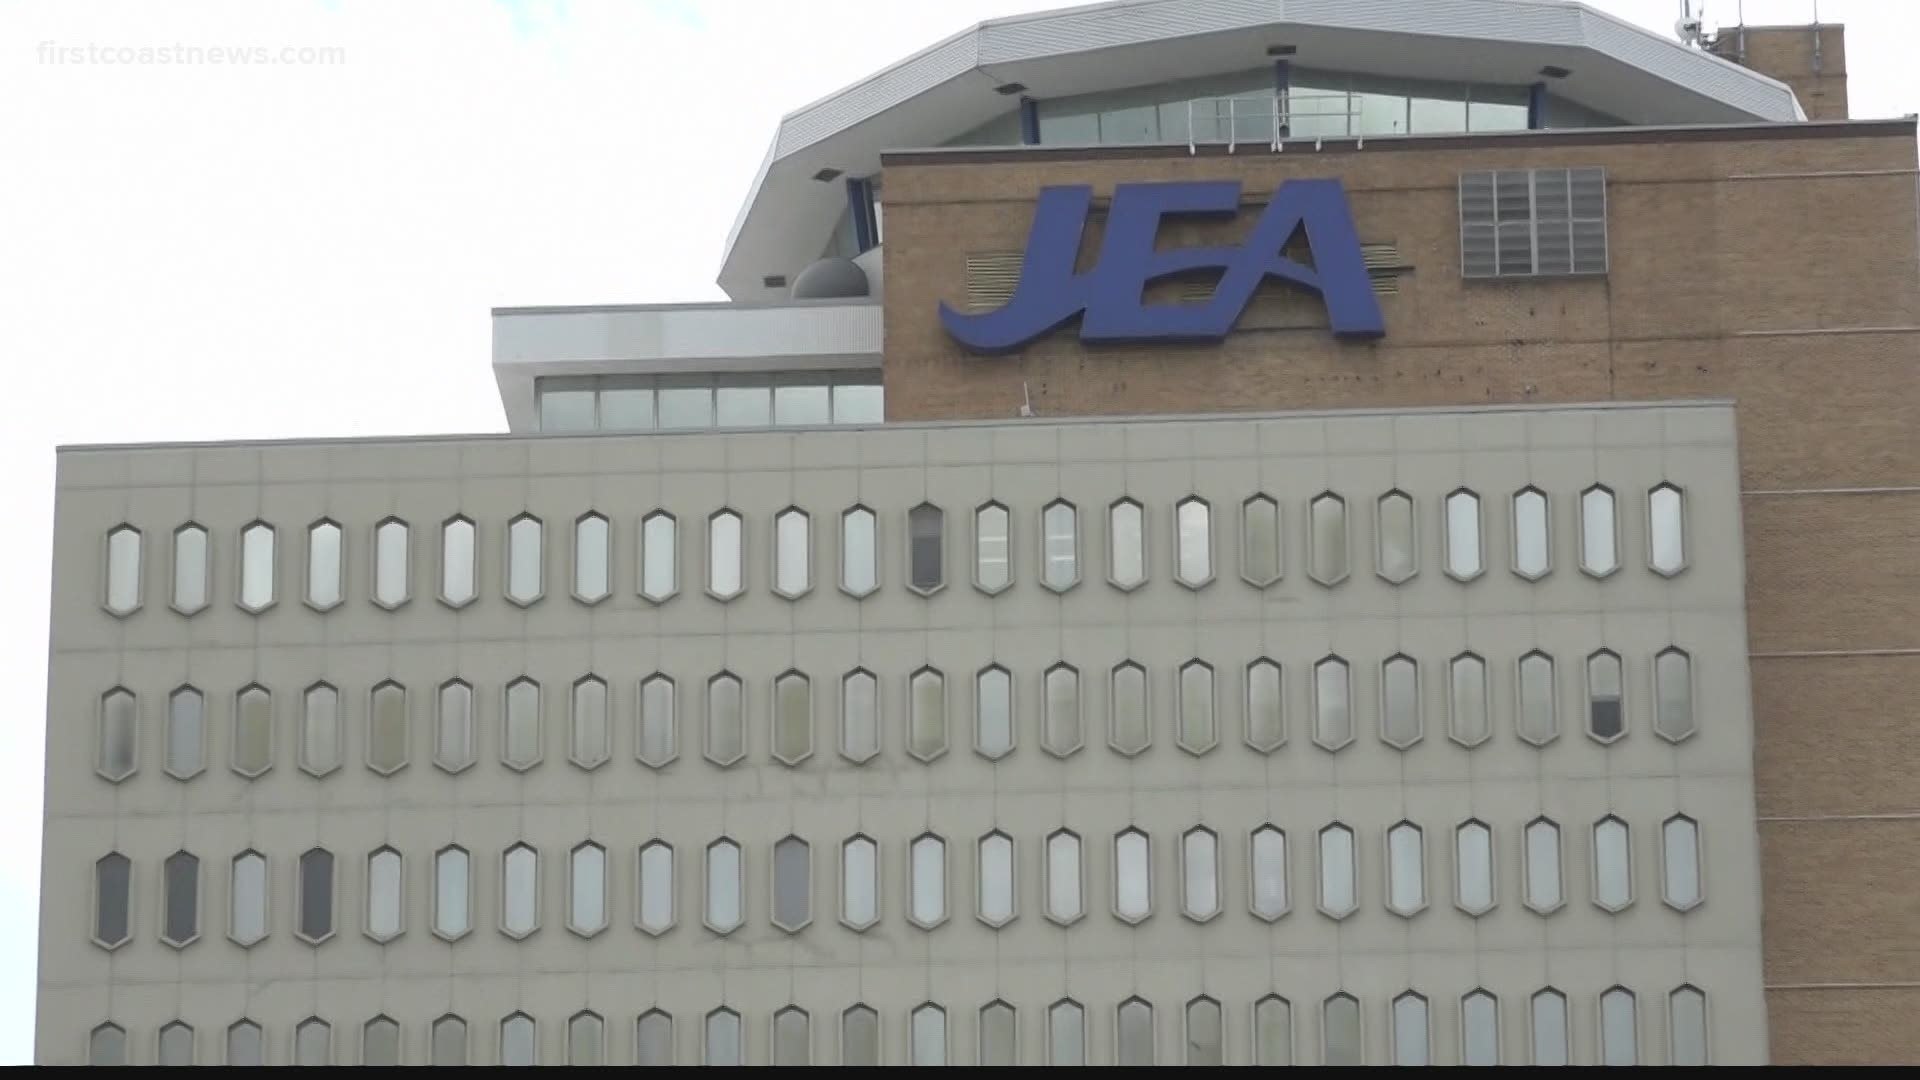 The sweeping changes come after a process that lasted well over a year to evaluate the need for JEA oversight by Jacksonville City Council.